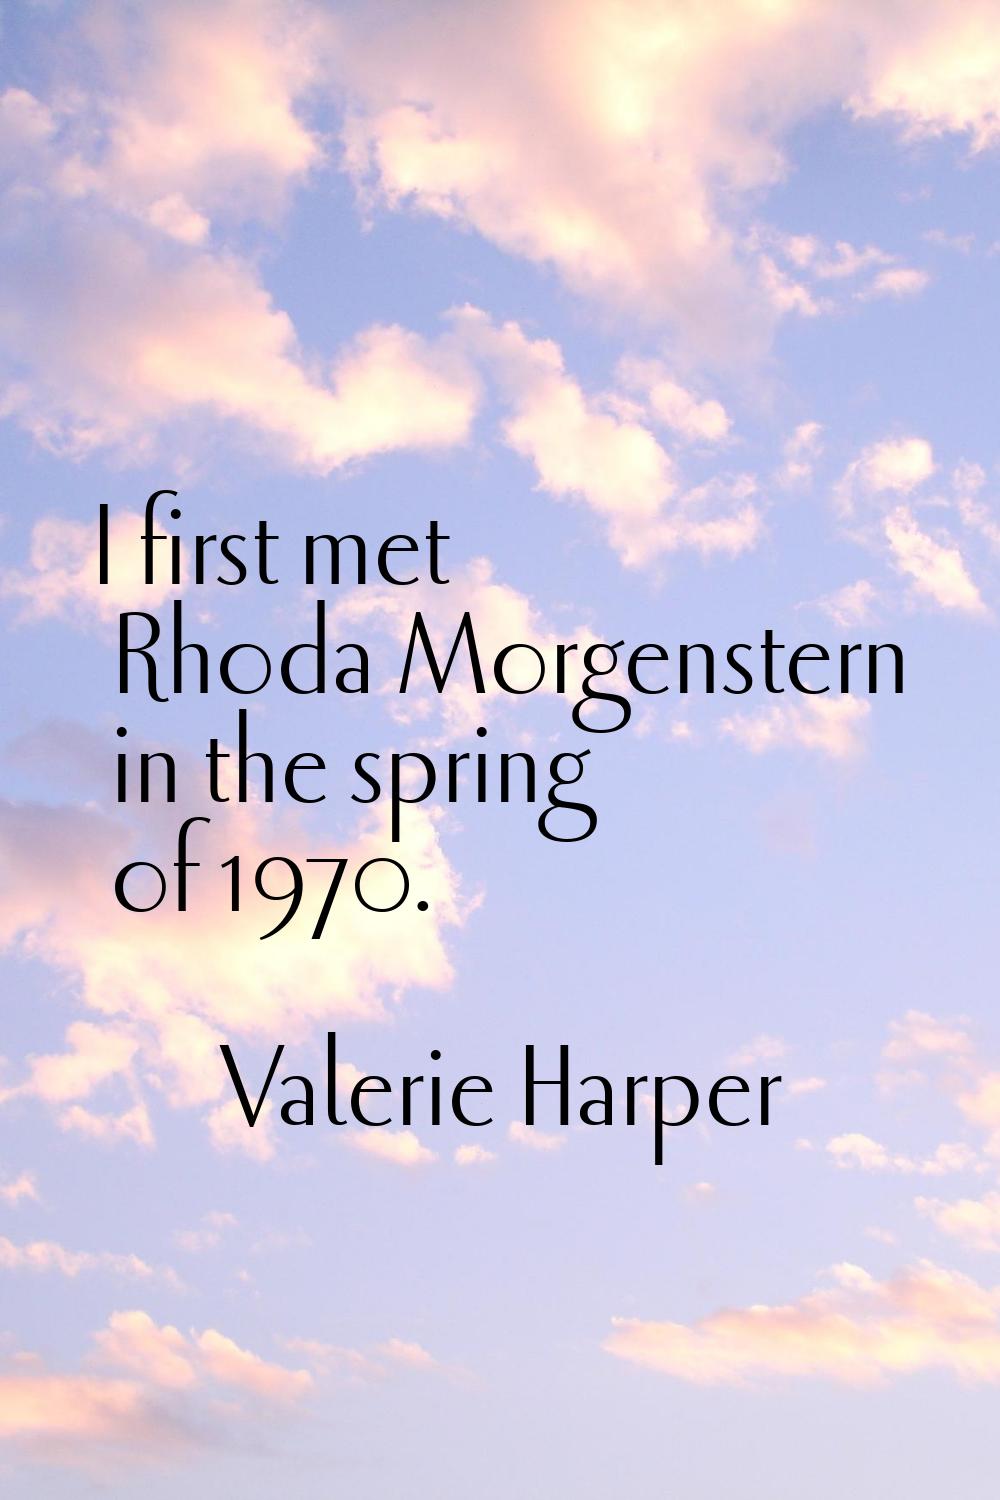 I first met Rhoda Morgenstern in the spring of 1970.